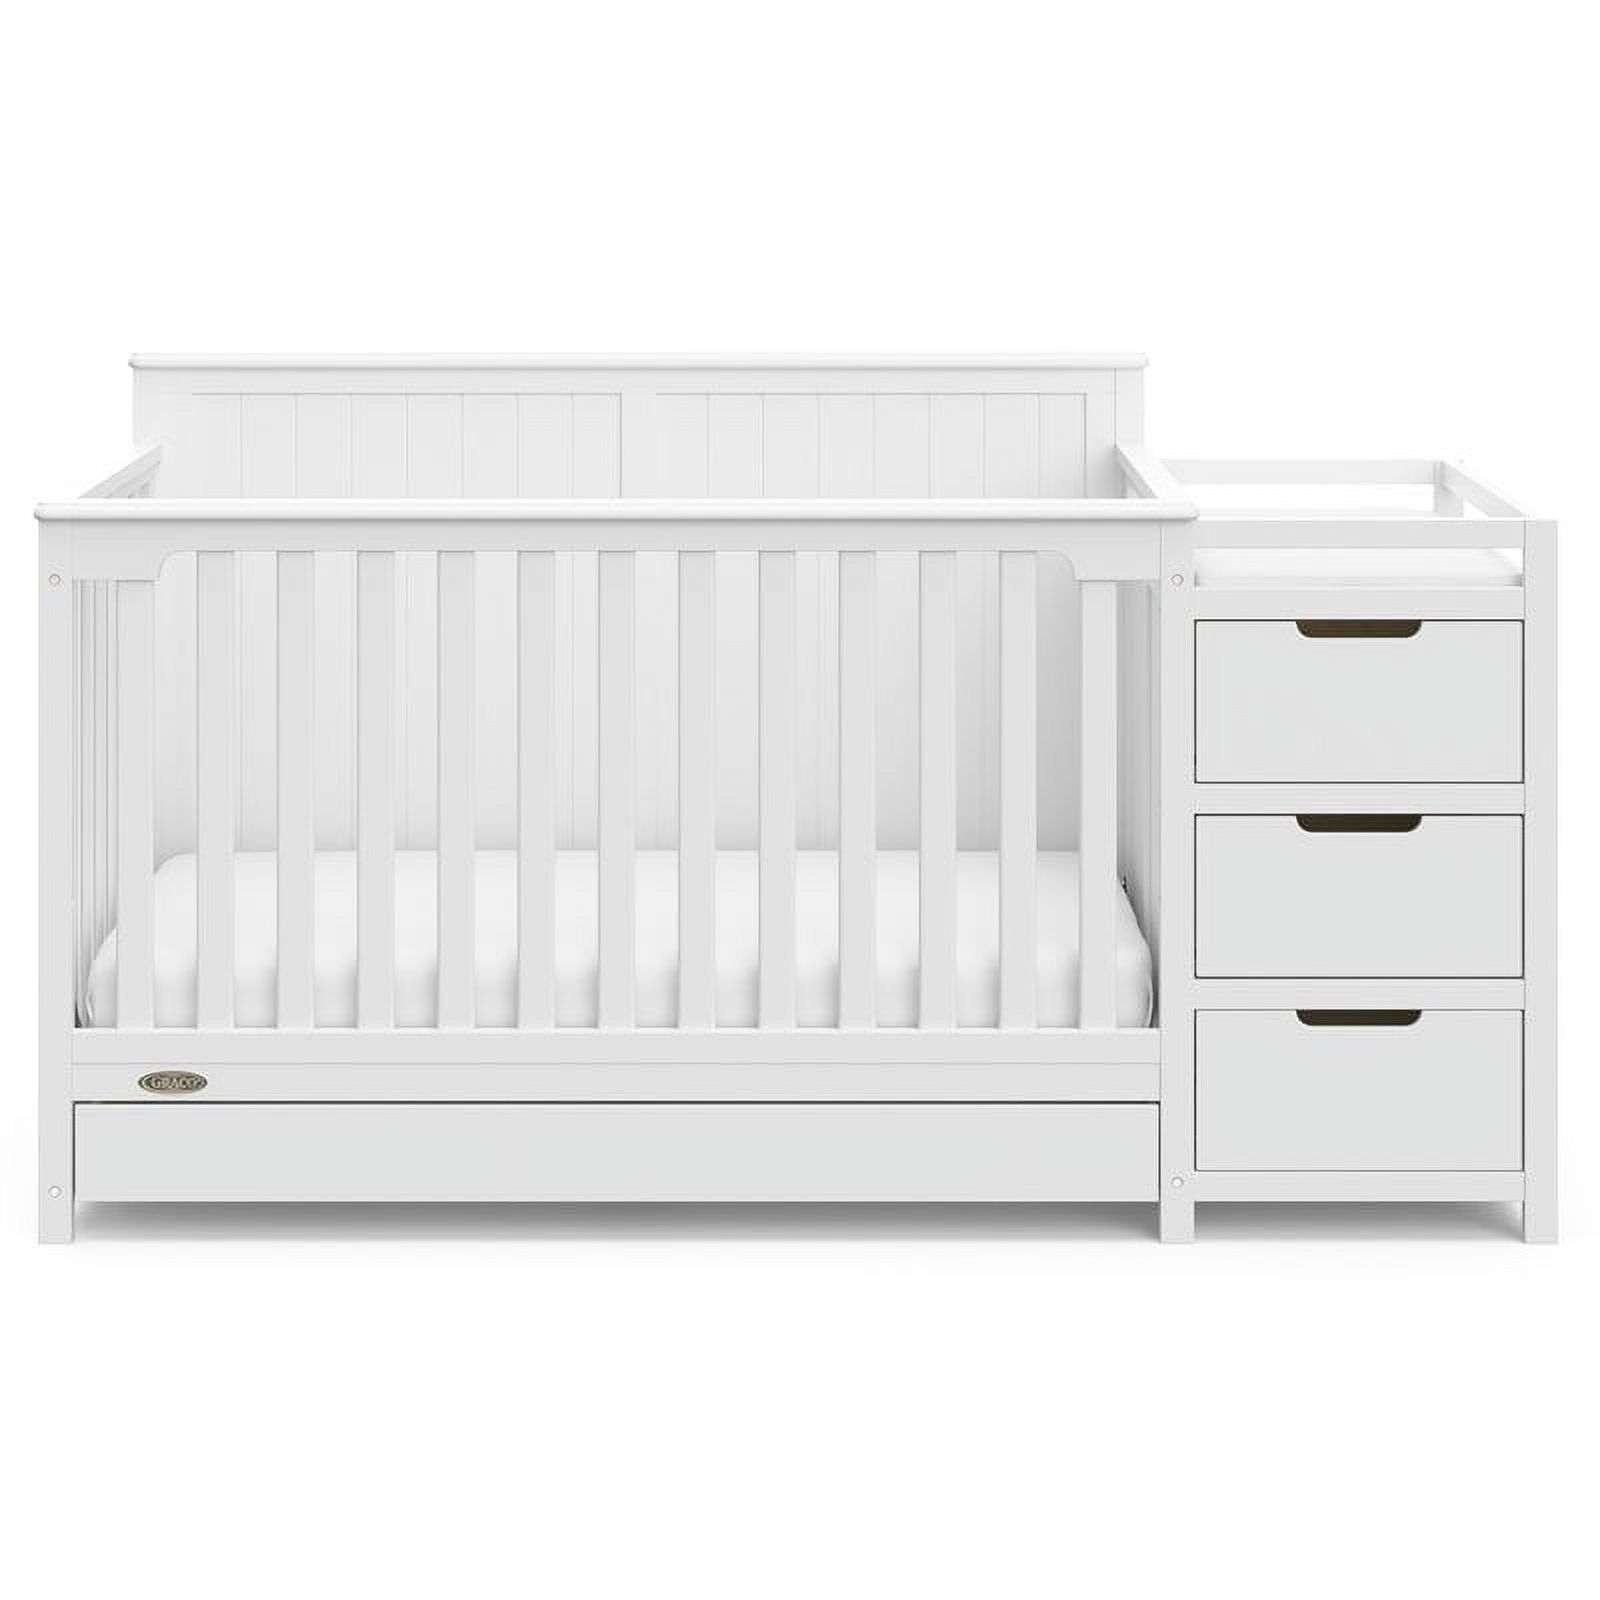 Graco Hadley 5-in-1 Convertible Crib and Changer with Drawer, White - image 1 of 14